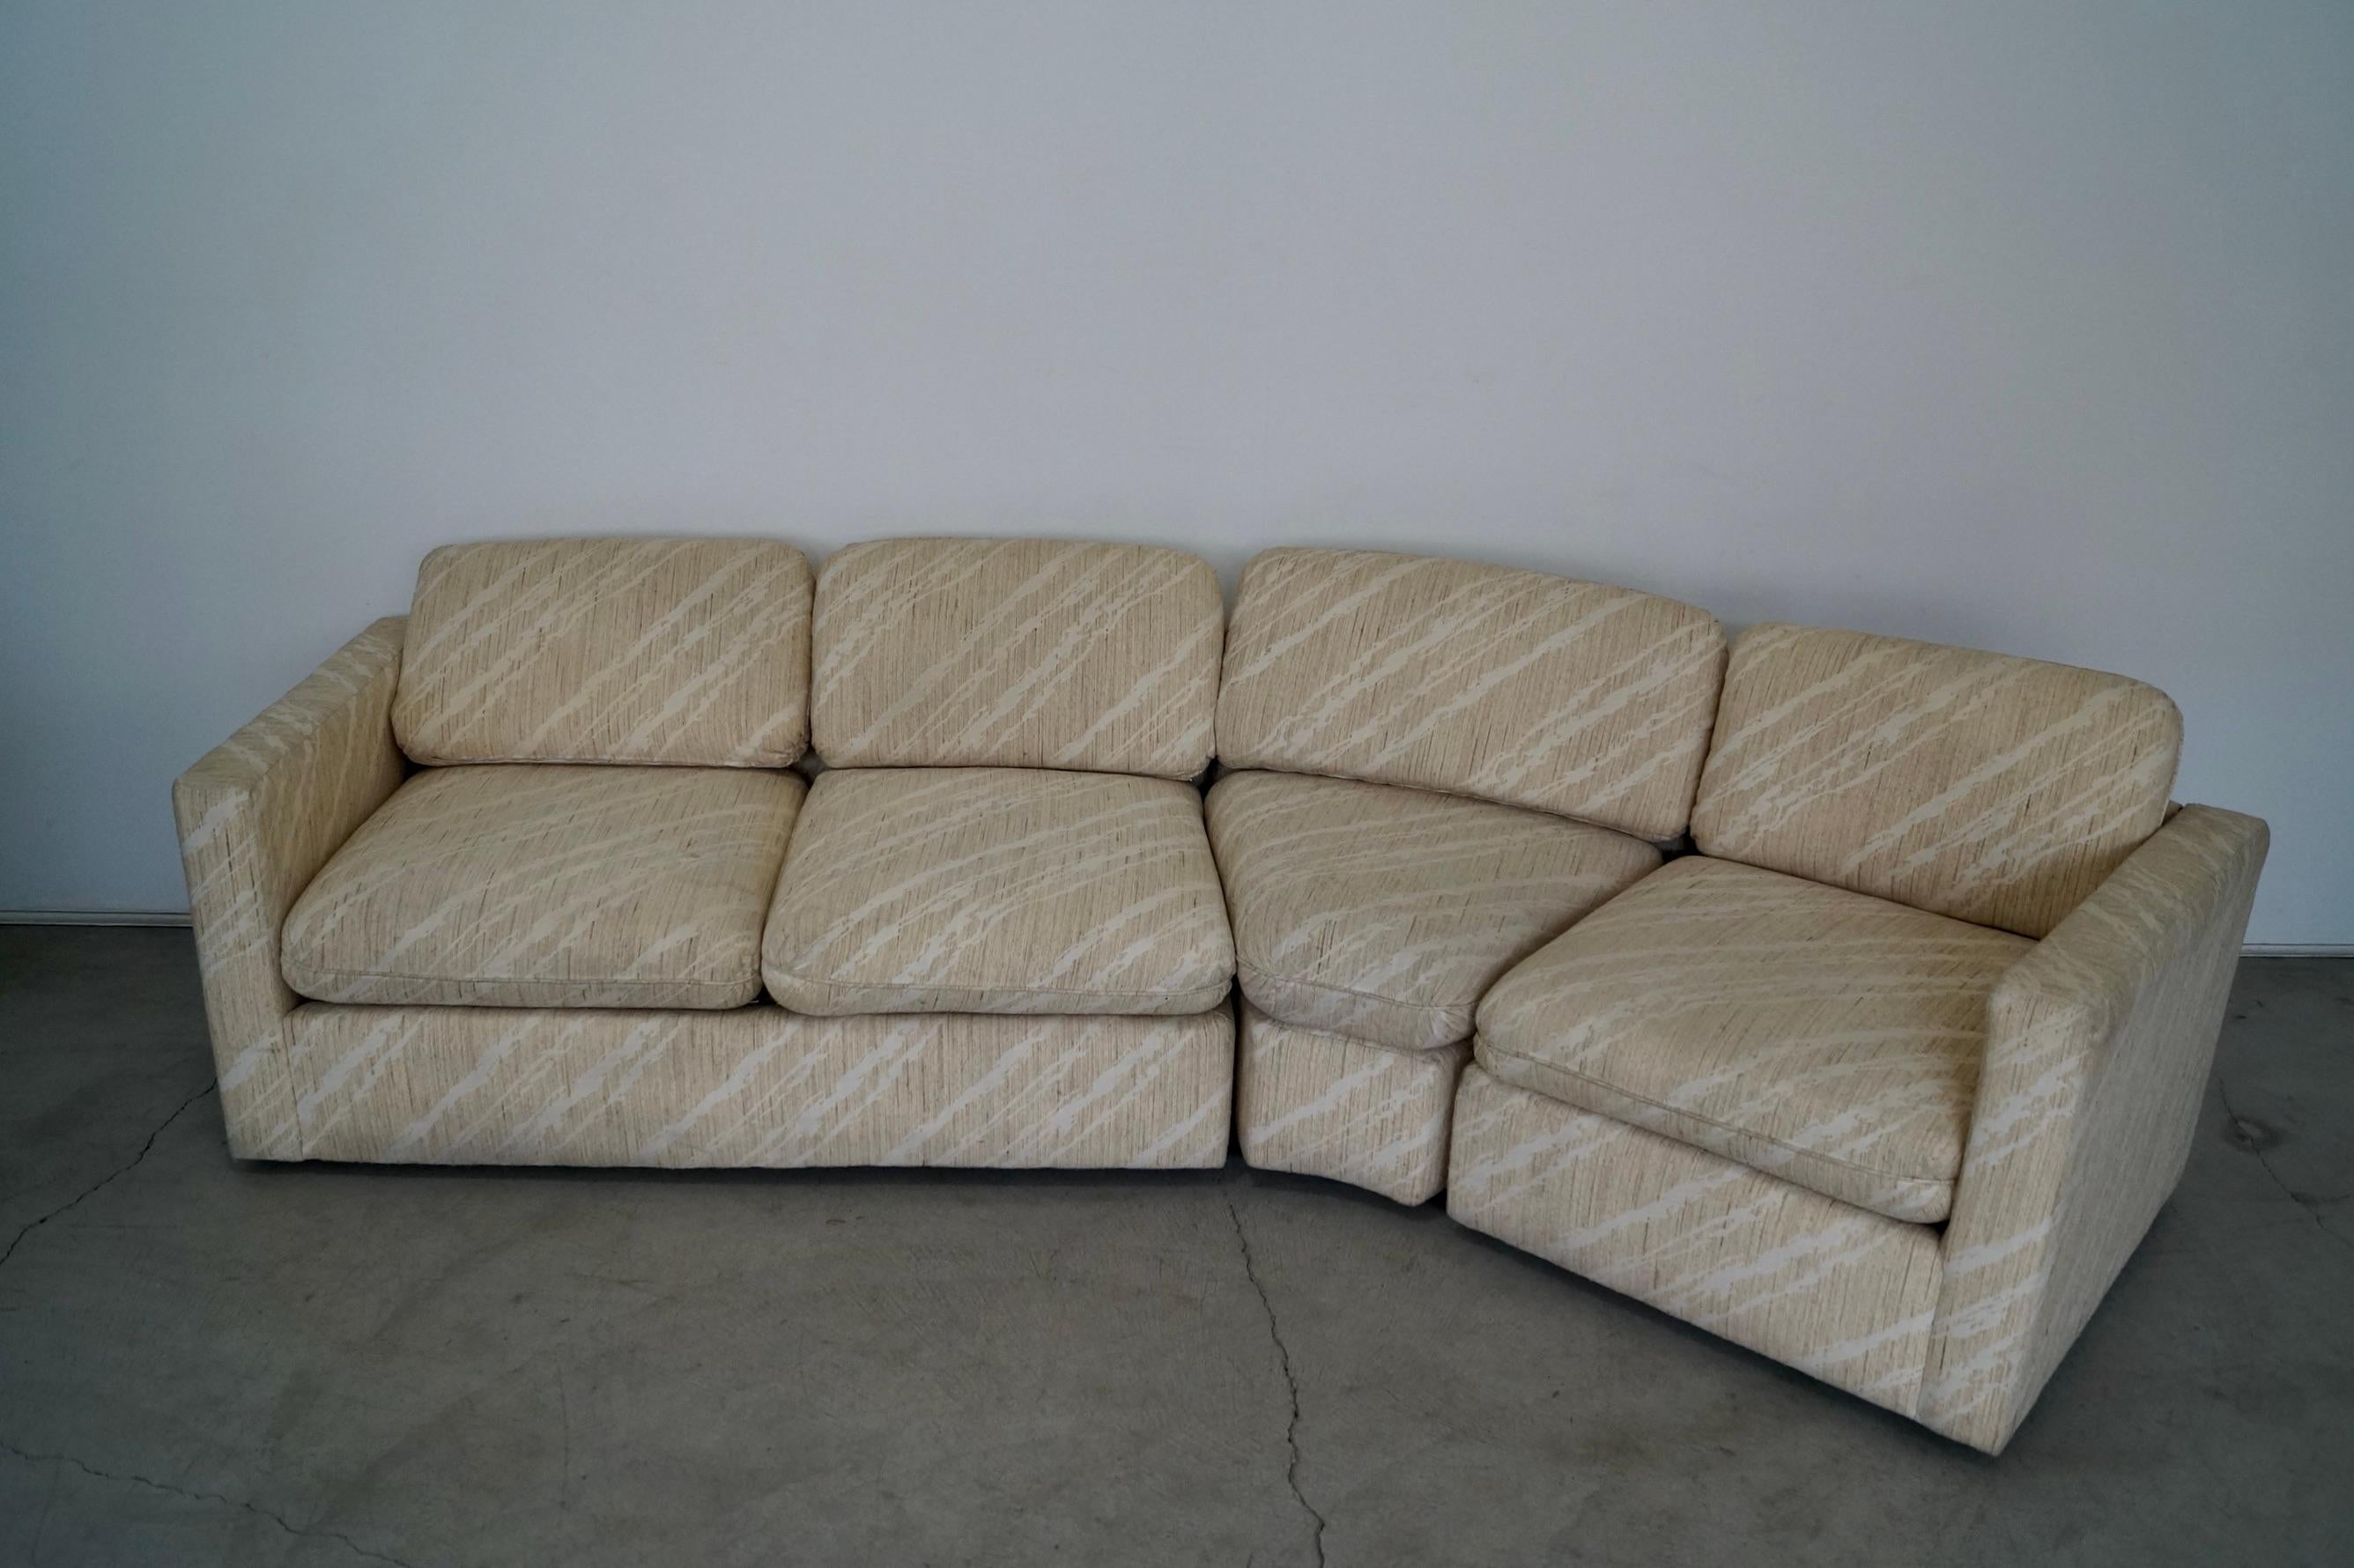 Vintage Mid-Century Modern sectional couch for sale. It was manufactured by Thayer Coggin in the 1970's, and designed by Milo Baughman. It has each individual piece still with the original tags, and still has the original vintage fabric. It comes